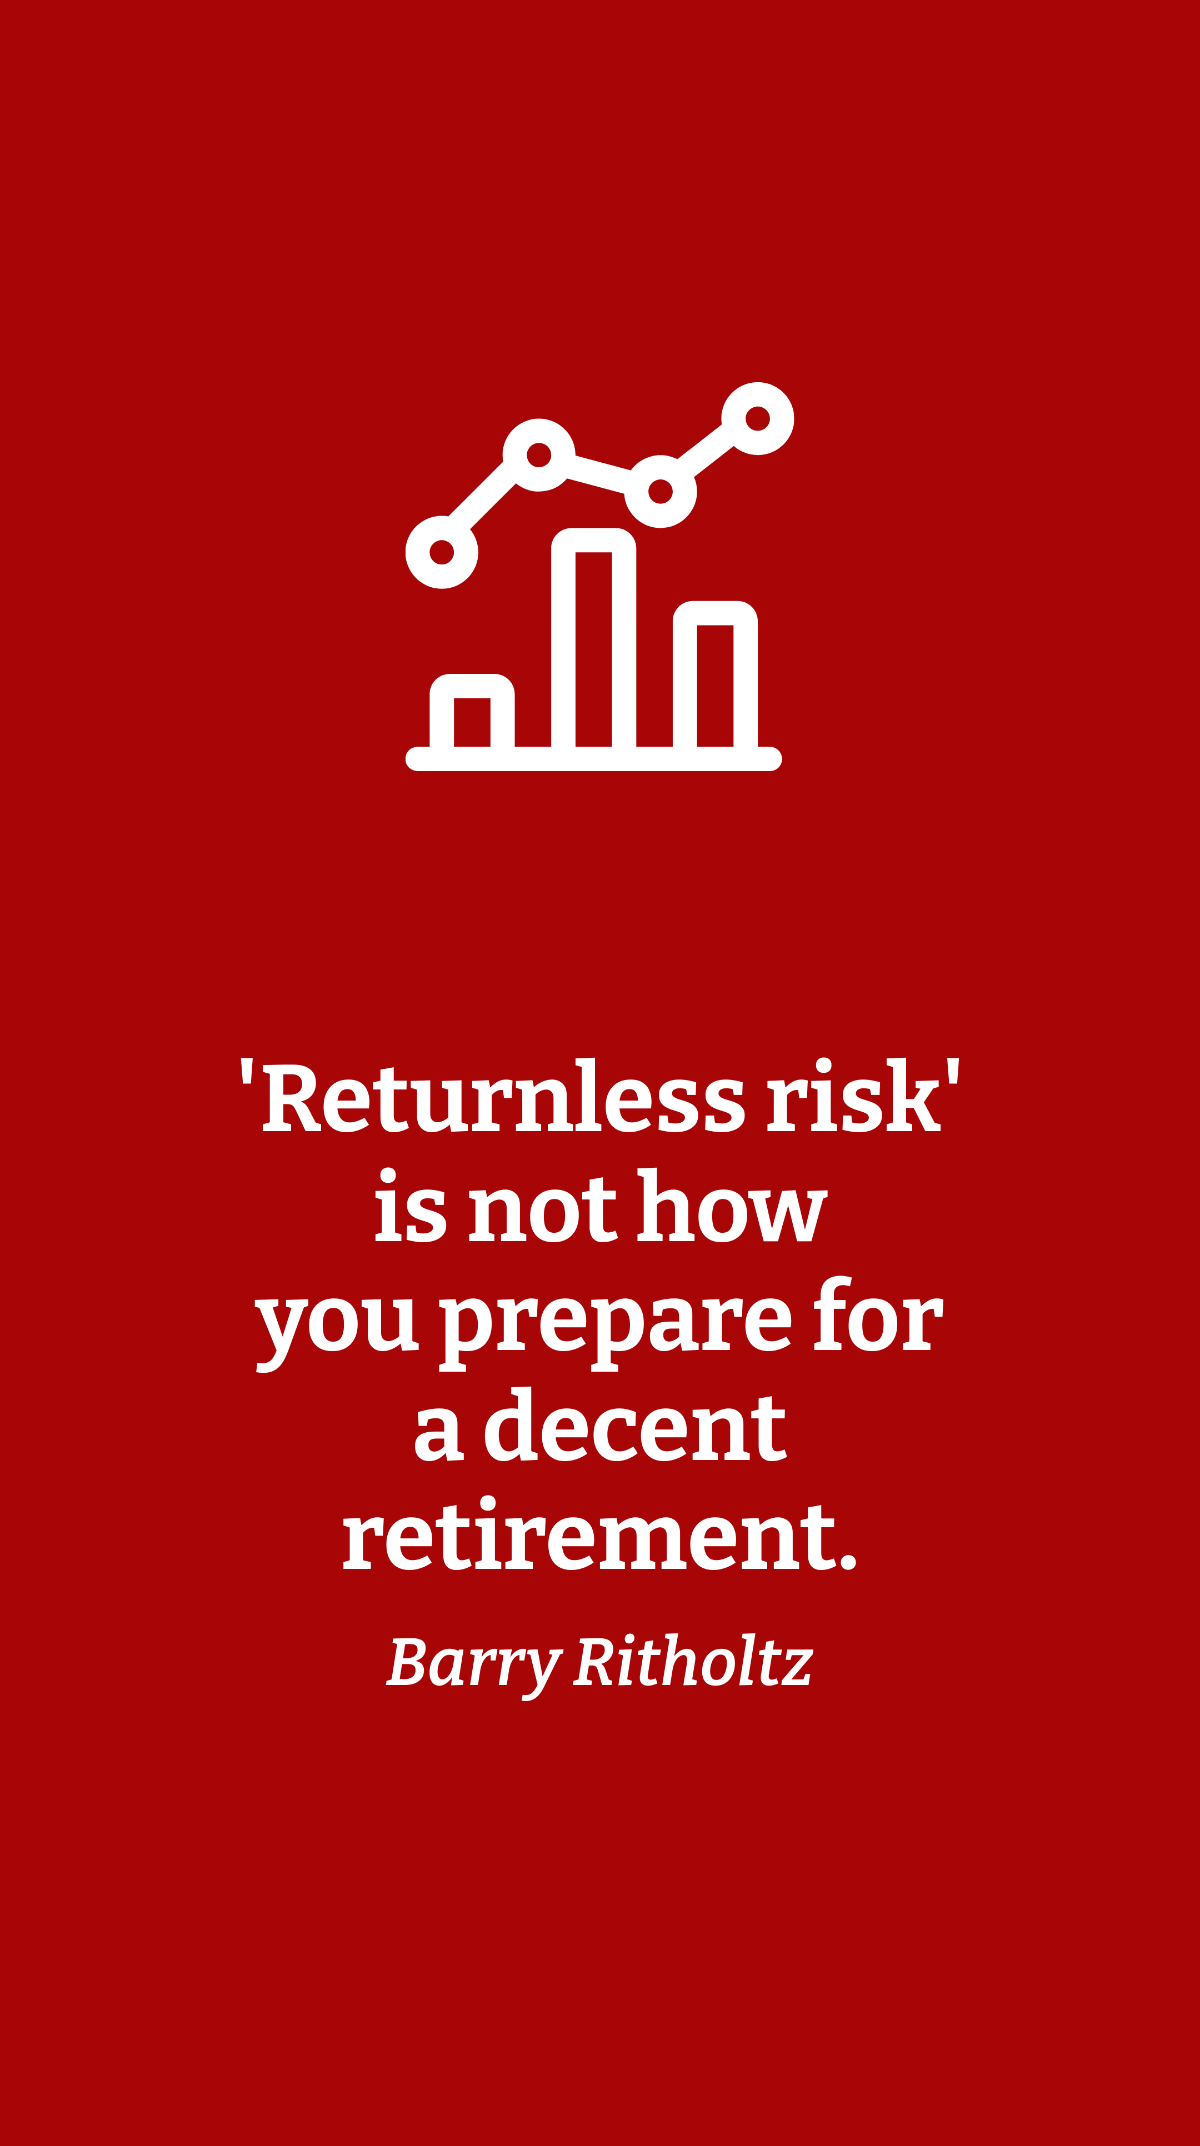 Free Barry Ritholtz - 'Returnless risk' is not how you prepare for a decent retirement. Template